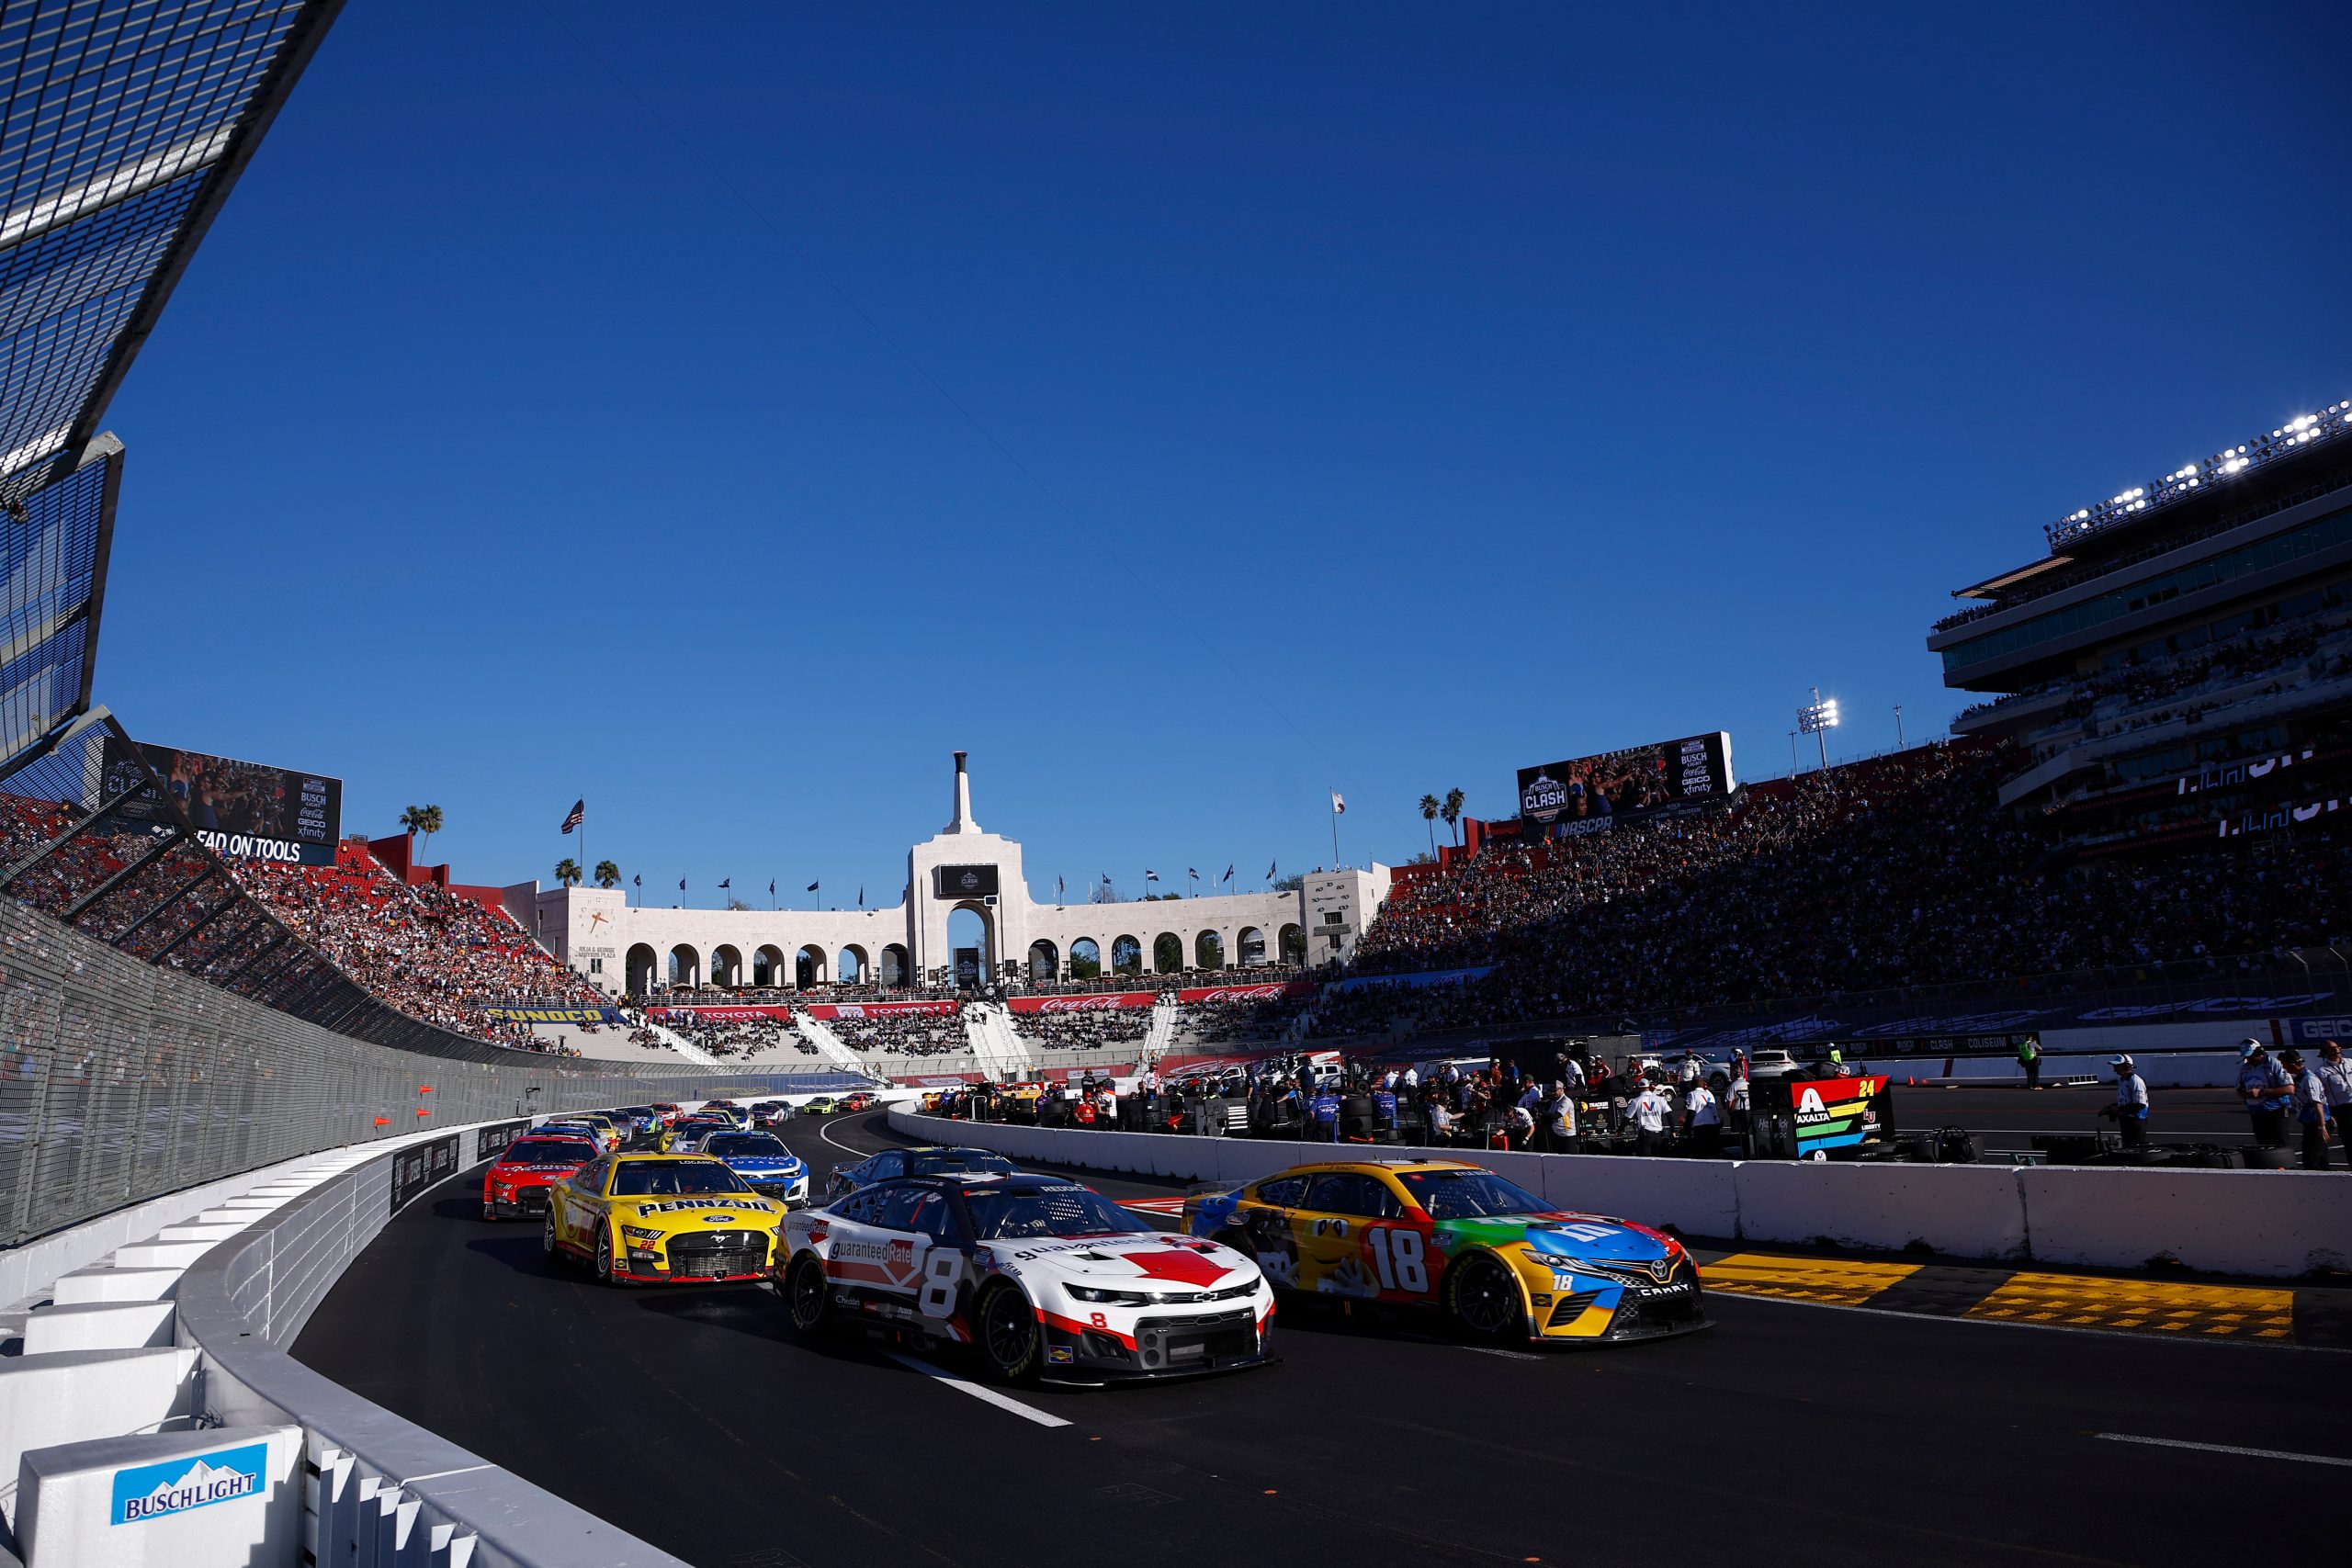 The NASCAR Cup Series field at the Los Angeles Coliseum